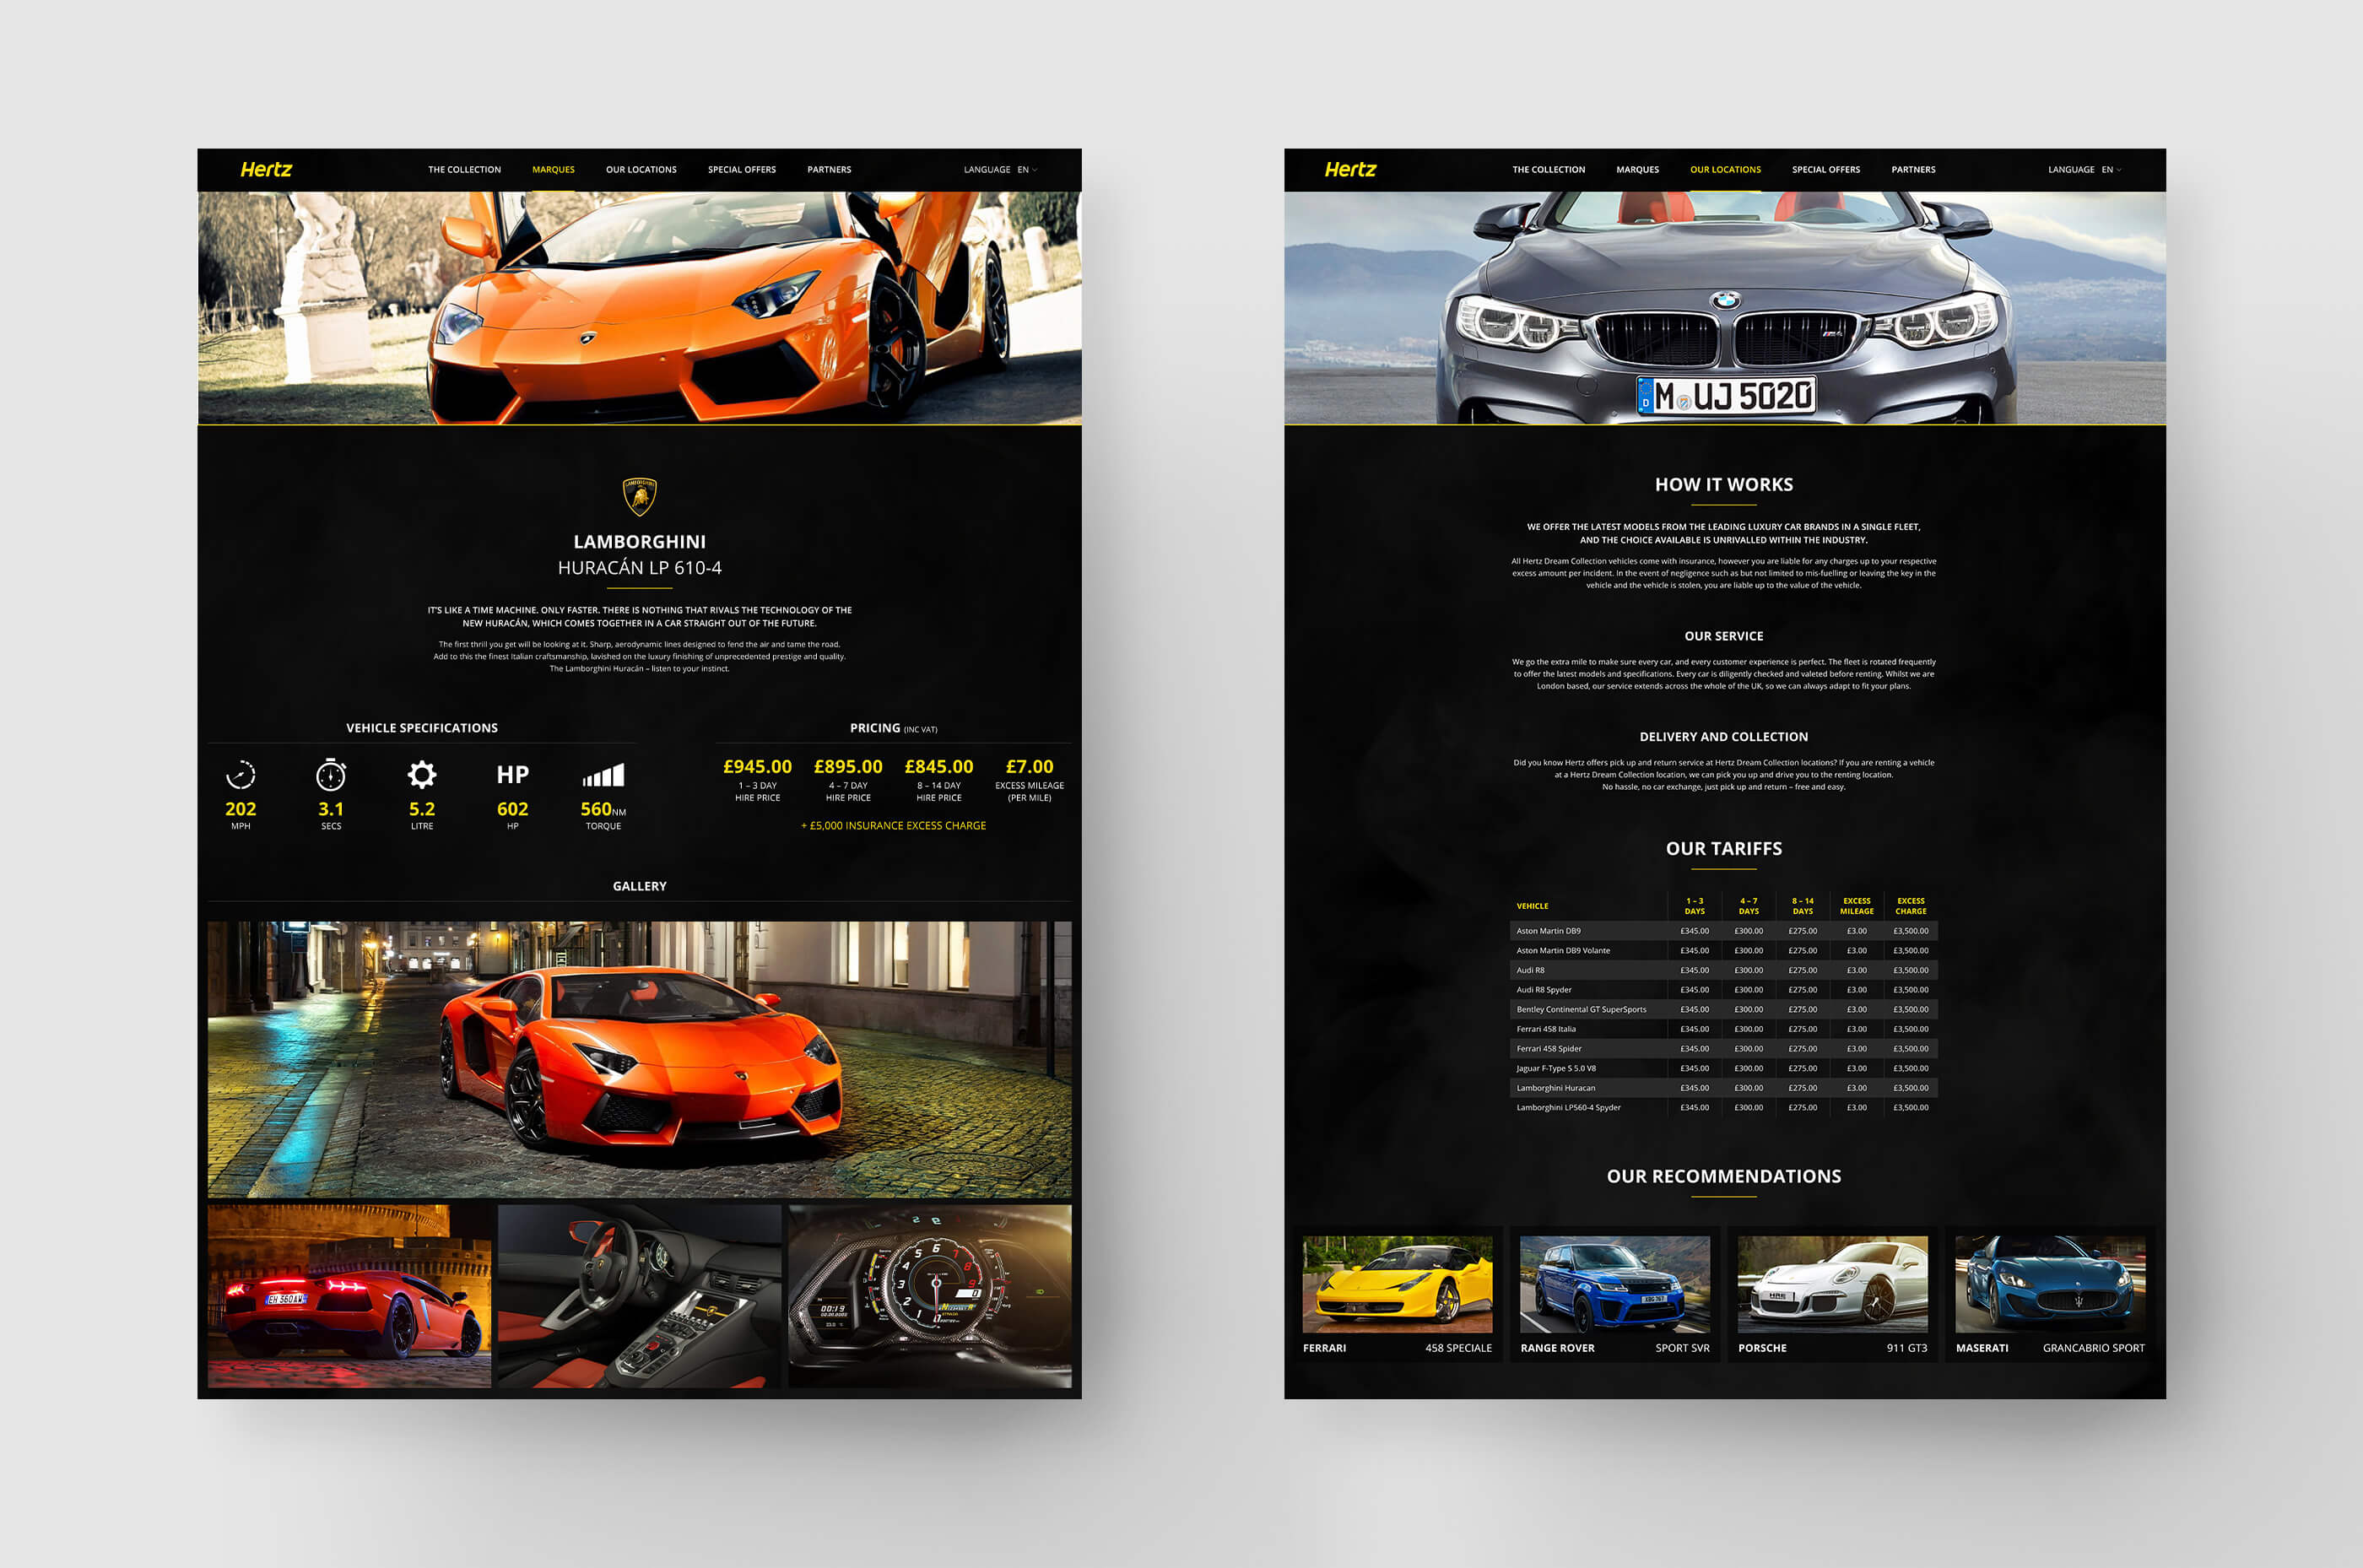 Lamborghini Huracán landing page, featuring top speed, 0–60 time, horsepower and engine specs, as well as daily hire price details